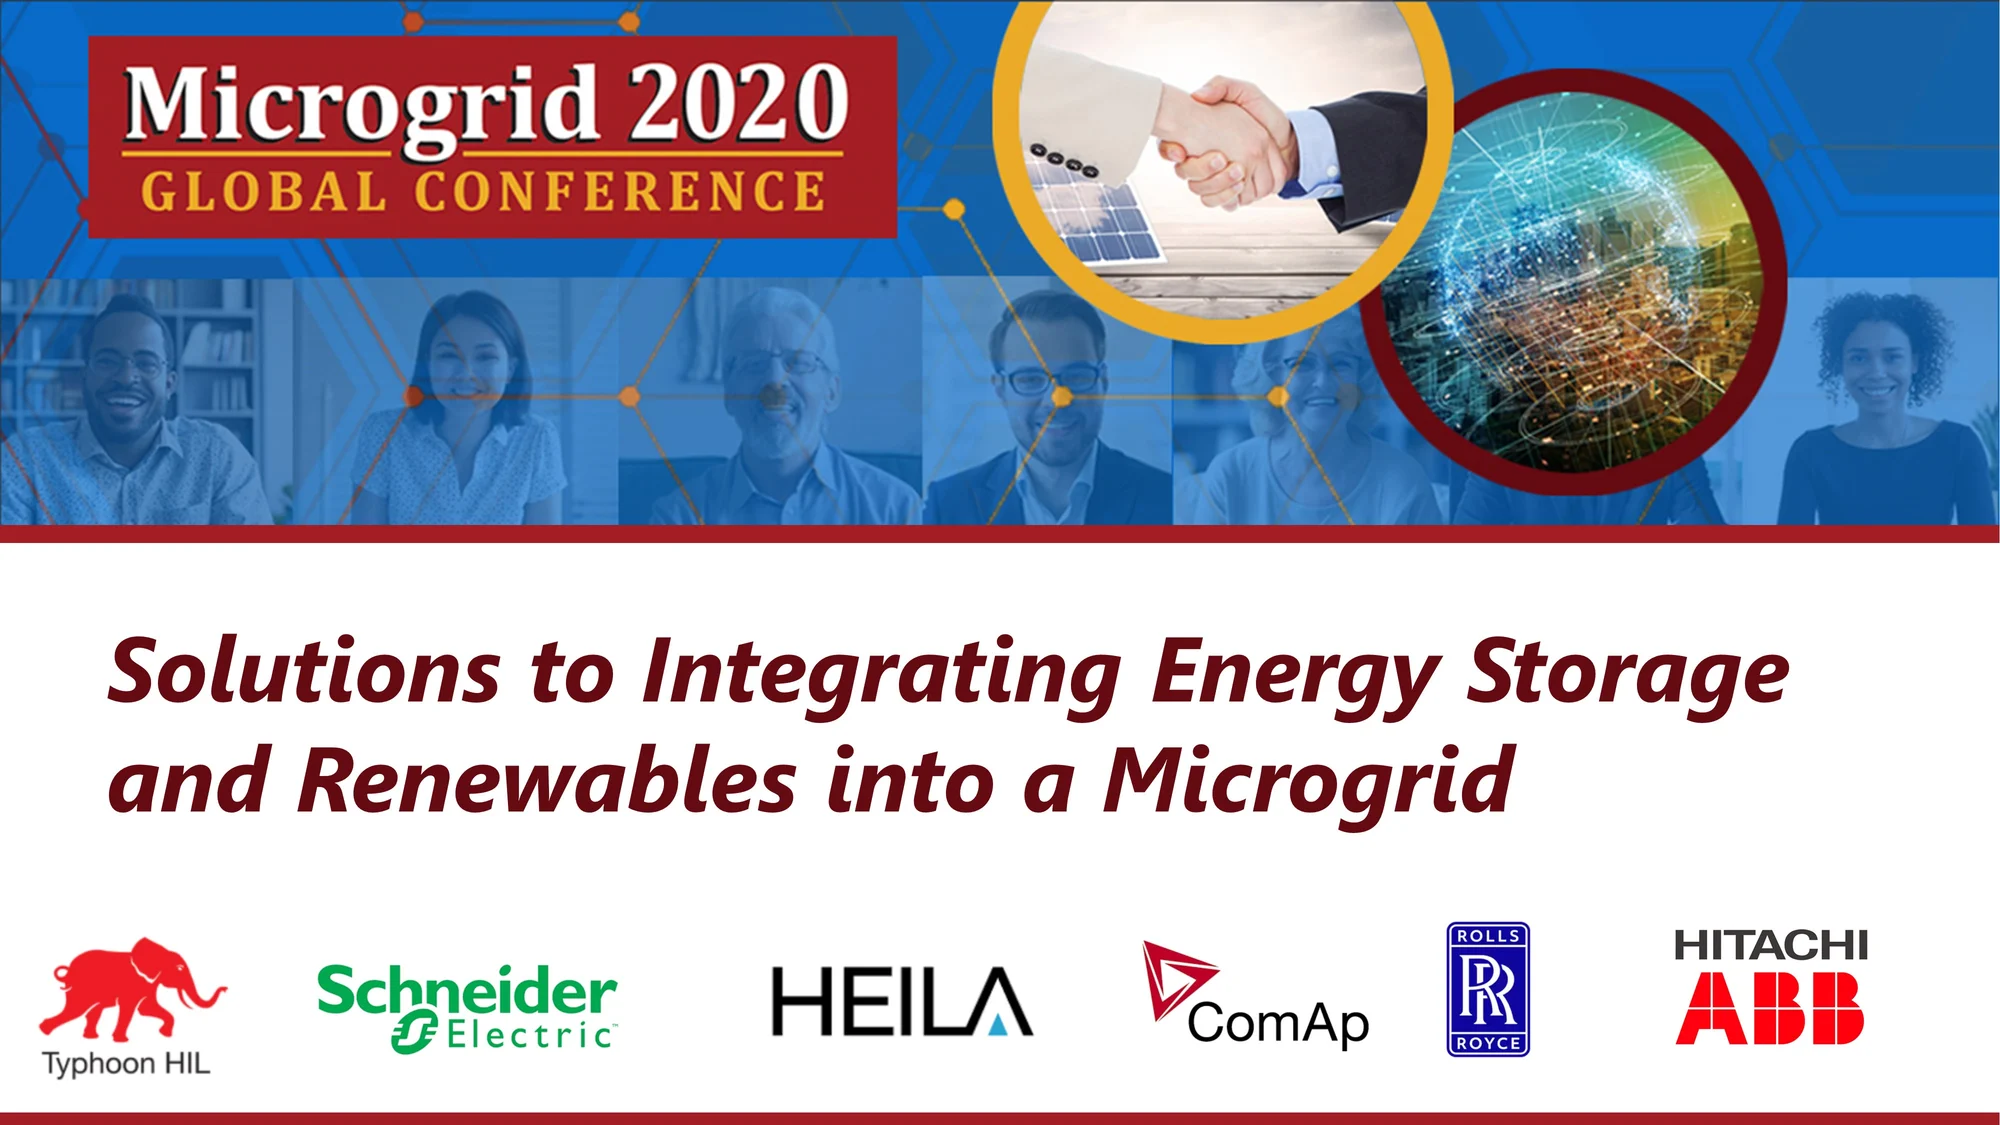 Microgrid 2020 Conference Workshop: Solutions to Integrating Energy Storage and Renewables into a Microgrid